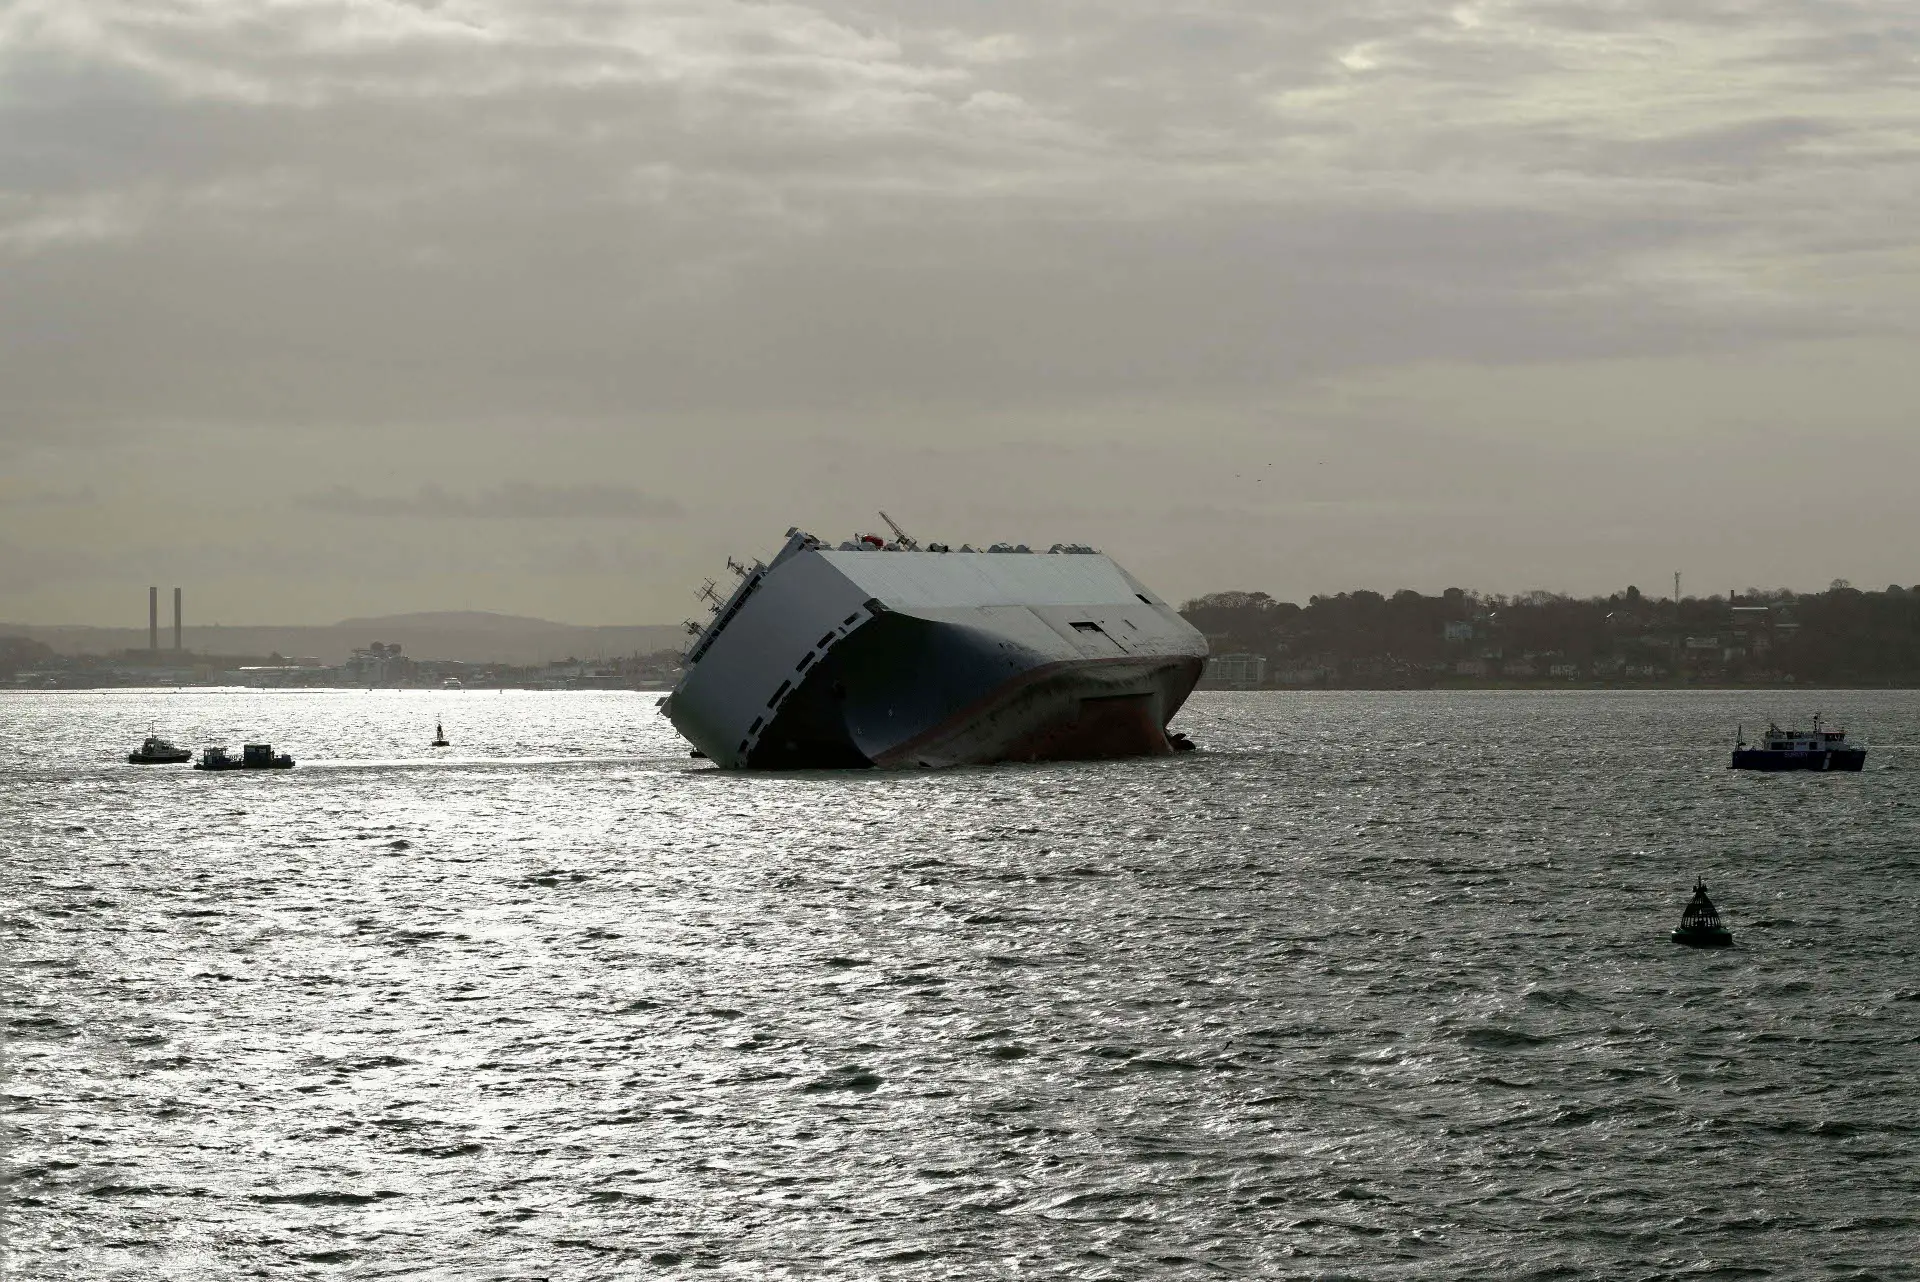 Hoegh Osaka by Keith Thompson from Studio Rouge